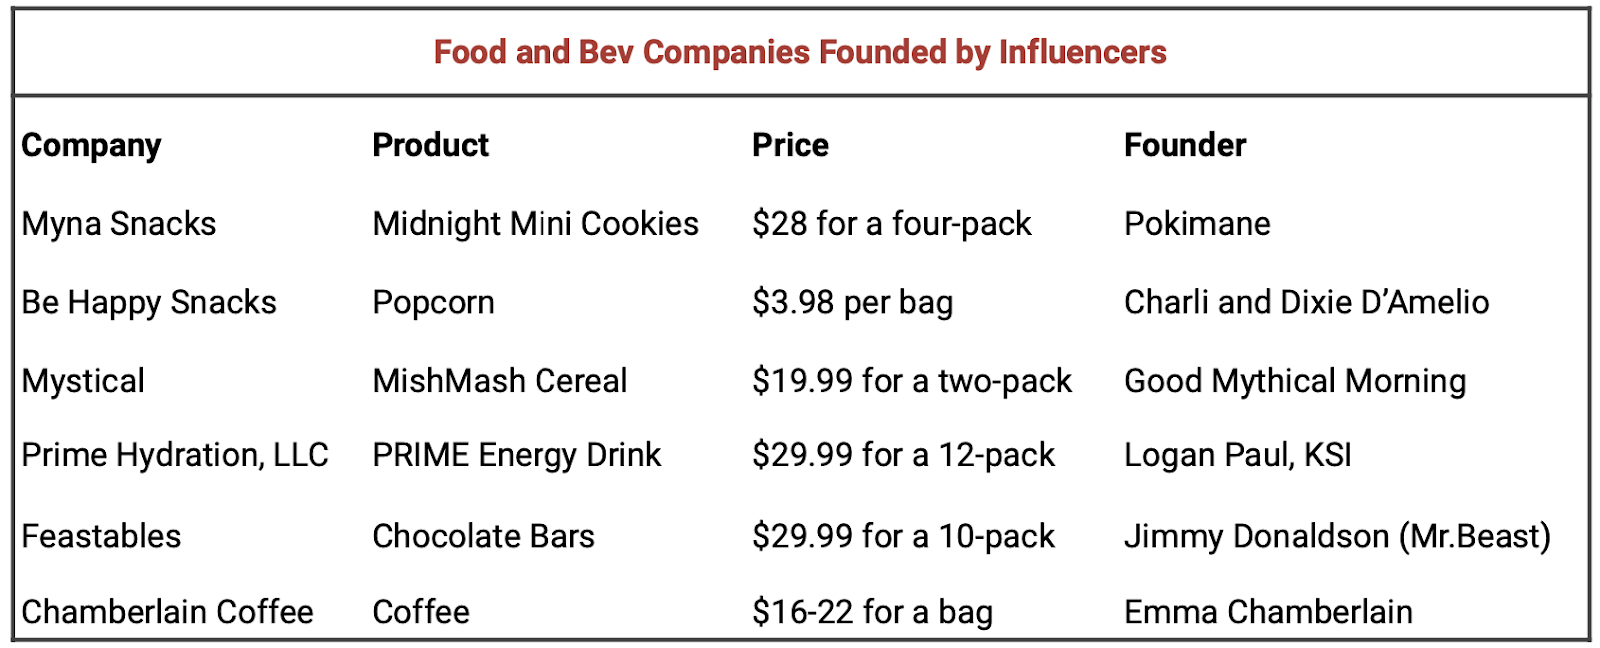 Table of influencer-founded food and bev companies